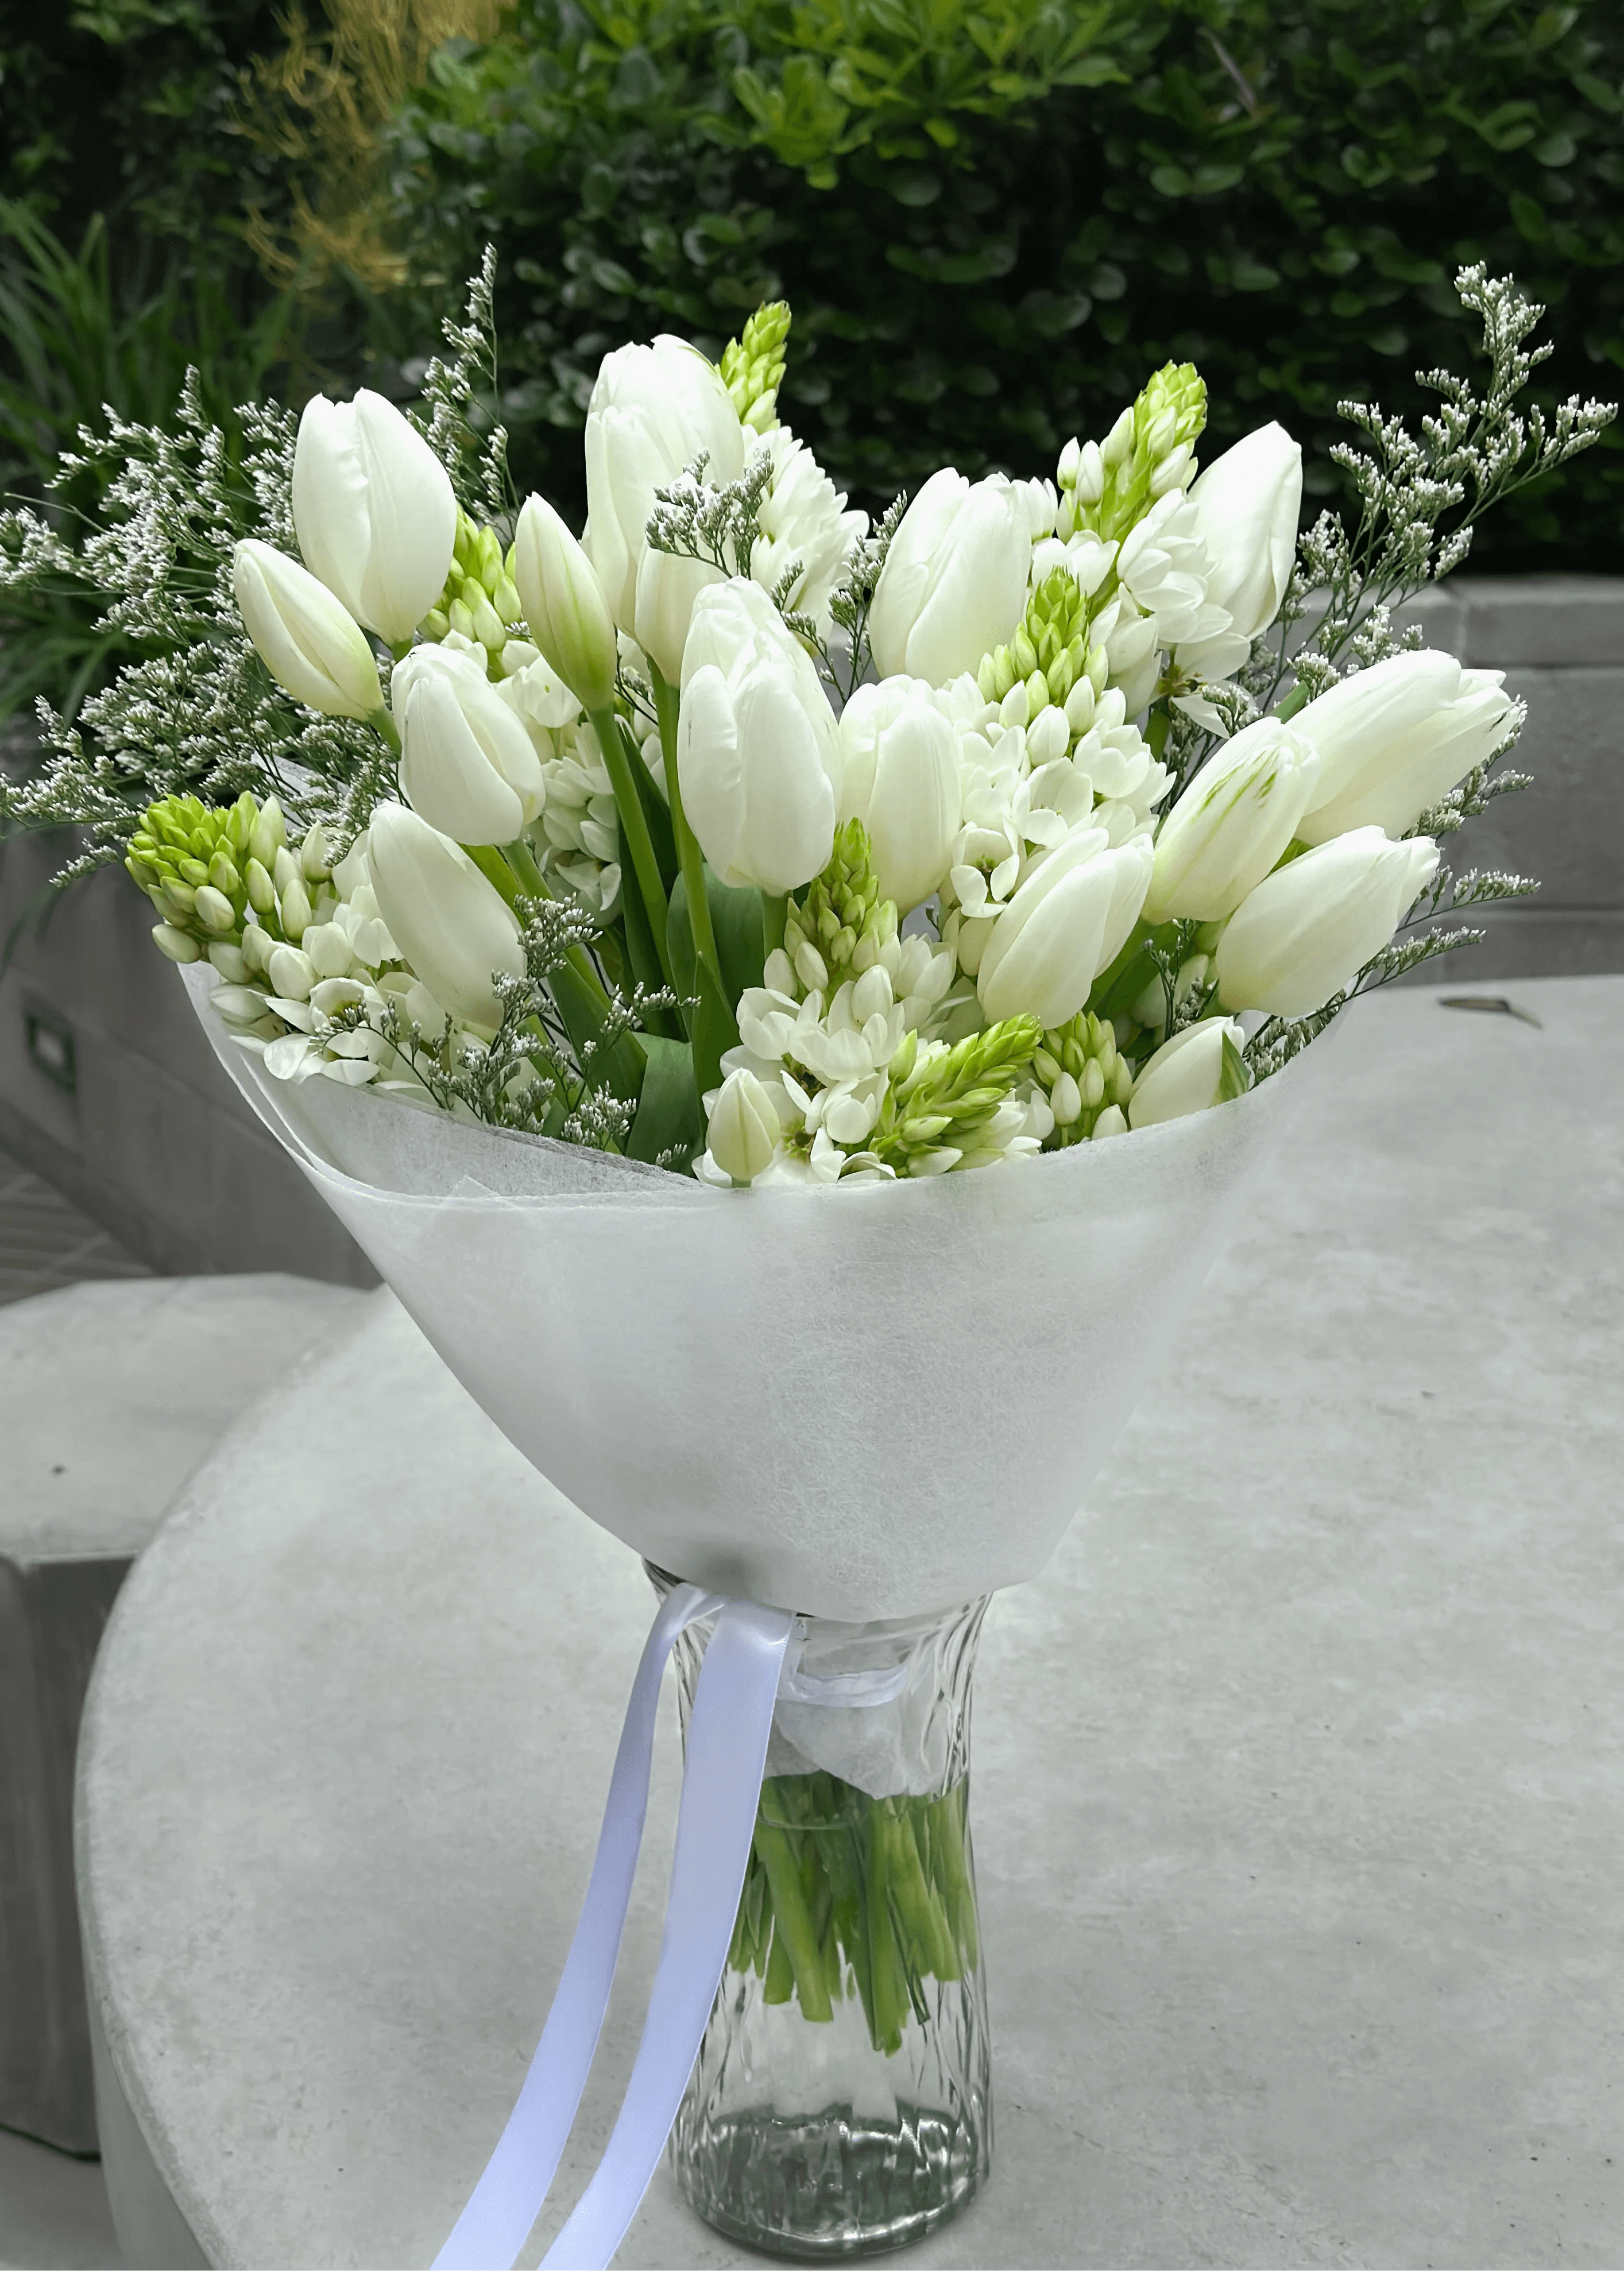 NO. 56. White Spring Bouquet (tulips, hyacinths)